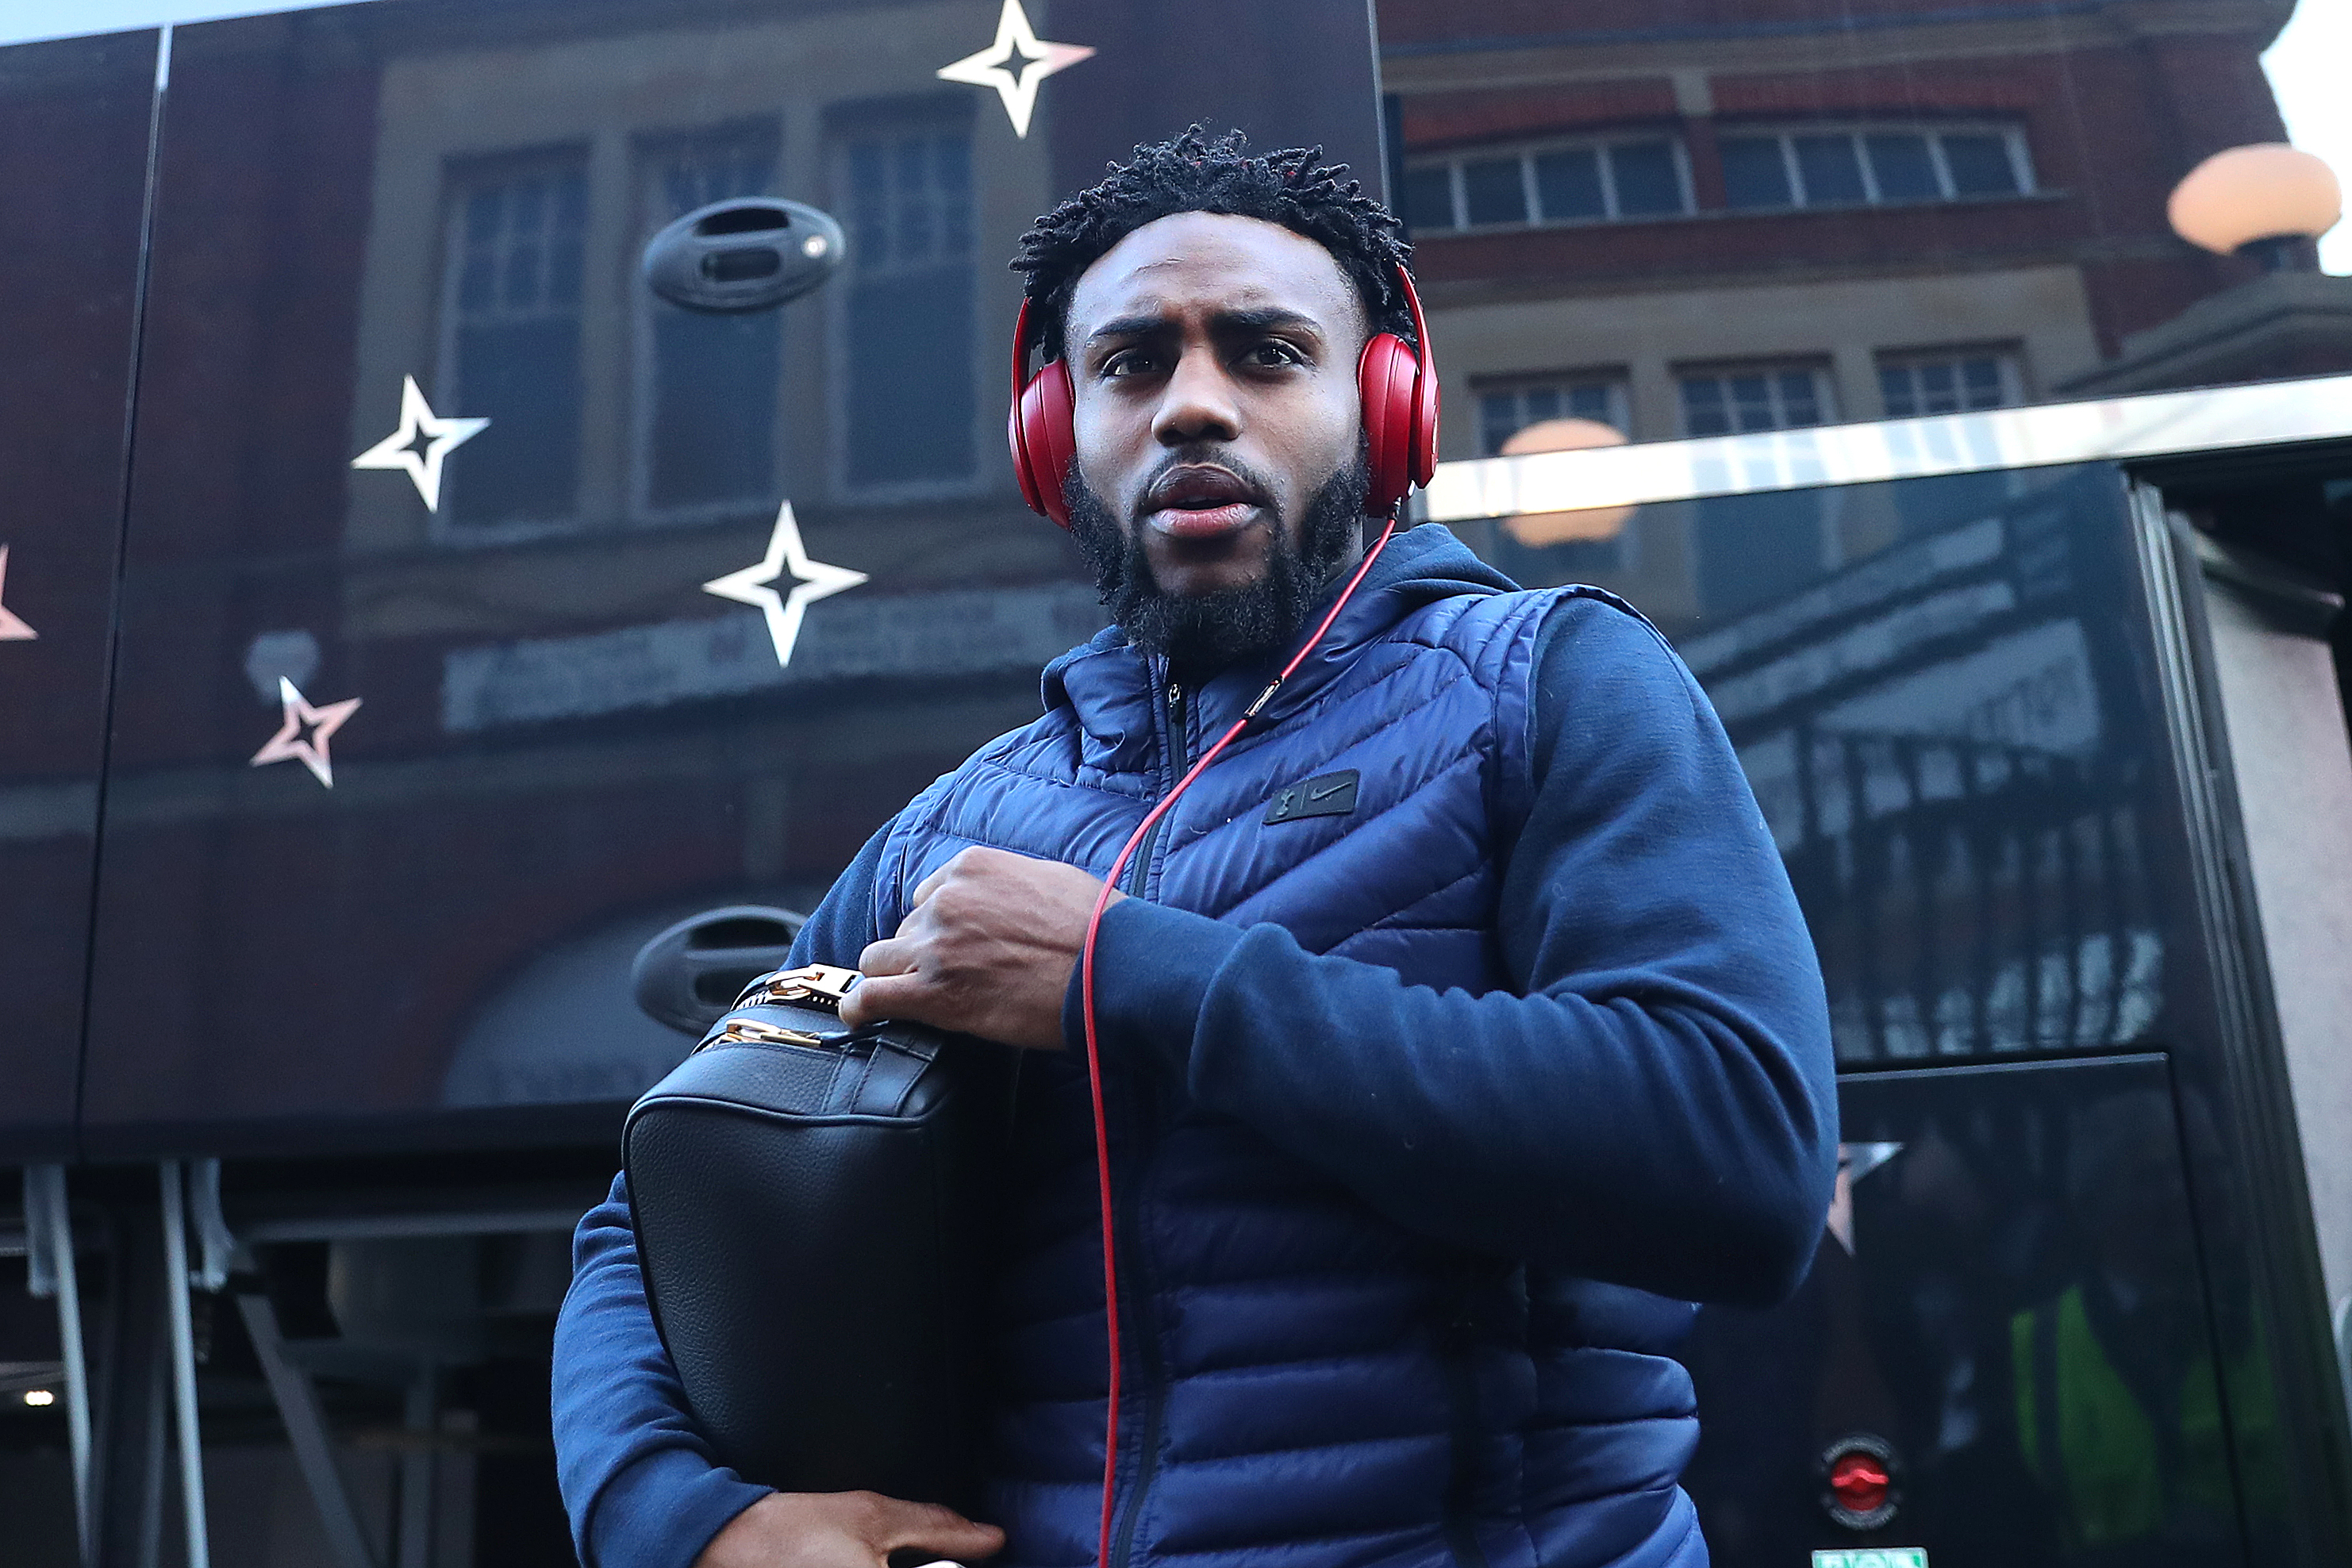 LONDON, ENGLAND - JANUARY 20: Danny Rose of Tottenham arrives during the Premier League match between Fulham FC and Tottenham Hotspur at Craven Cottage on January 20, 2019 in London, United Kingdom. (Photo by Catherine Ivill/Getty Images)